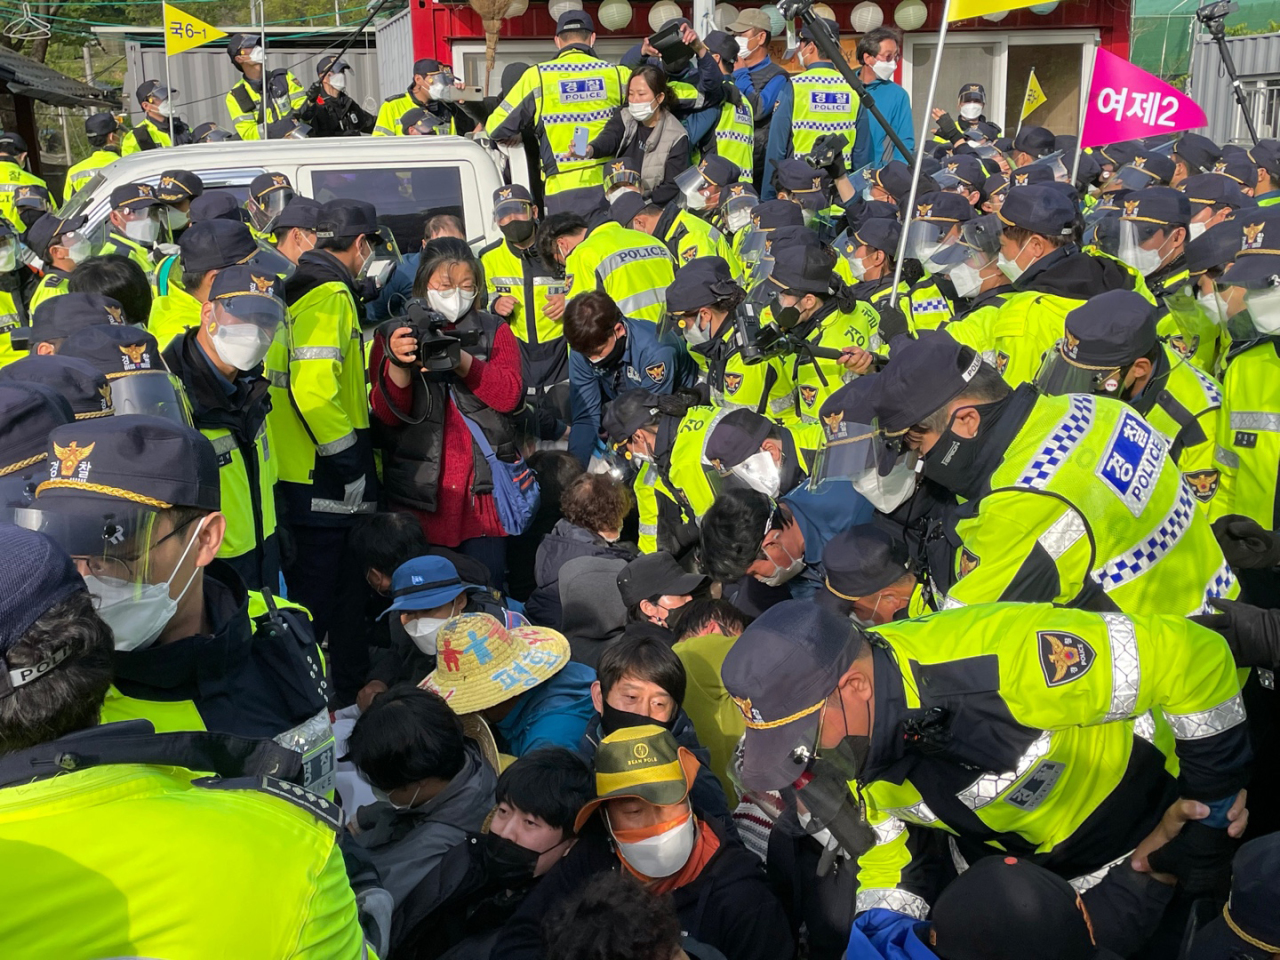 In the April 28, 2021, file photo, police break up a sit-in by residents and activists opposing the delivery of electrical equipment and construction materials into the US Terminal High Altitude Area Defense (THAAD) base in the southeastern county of Seongju, North Gyeongsang Province. (Yonhap)